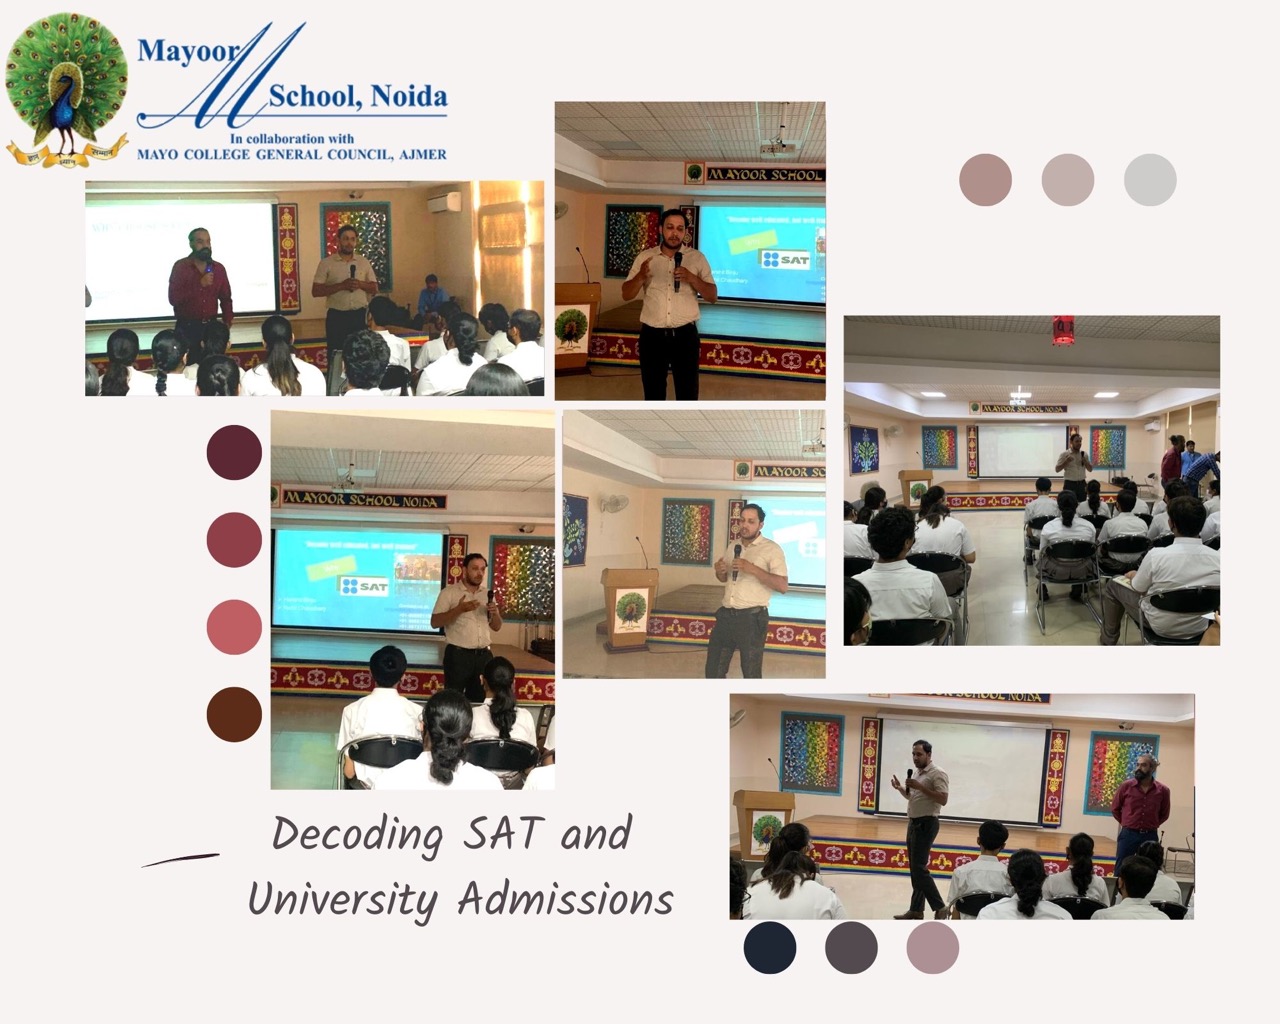 Decoding SAT and University Admissions